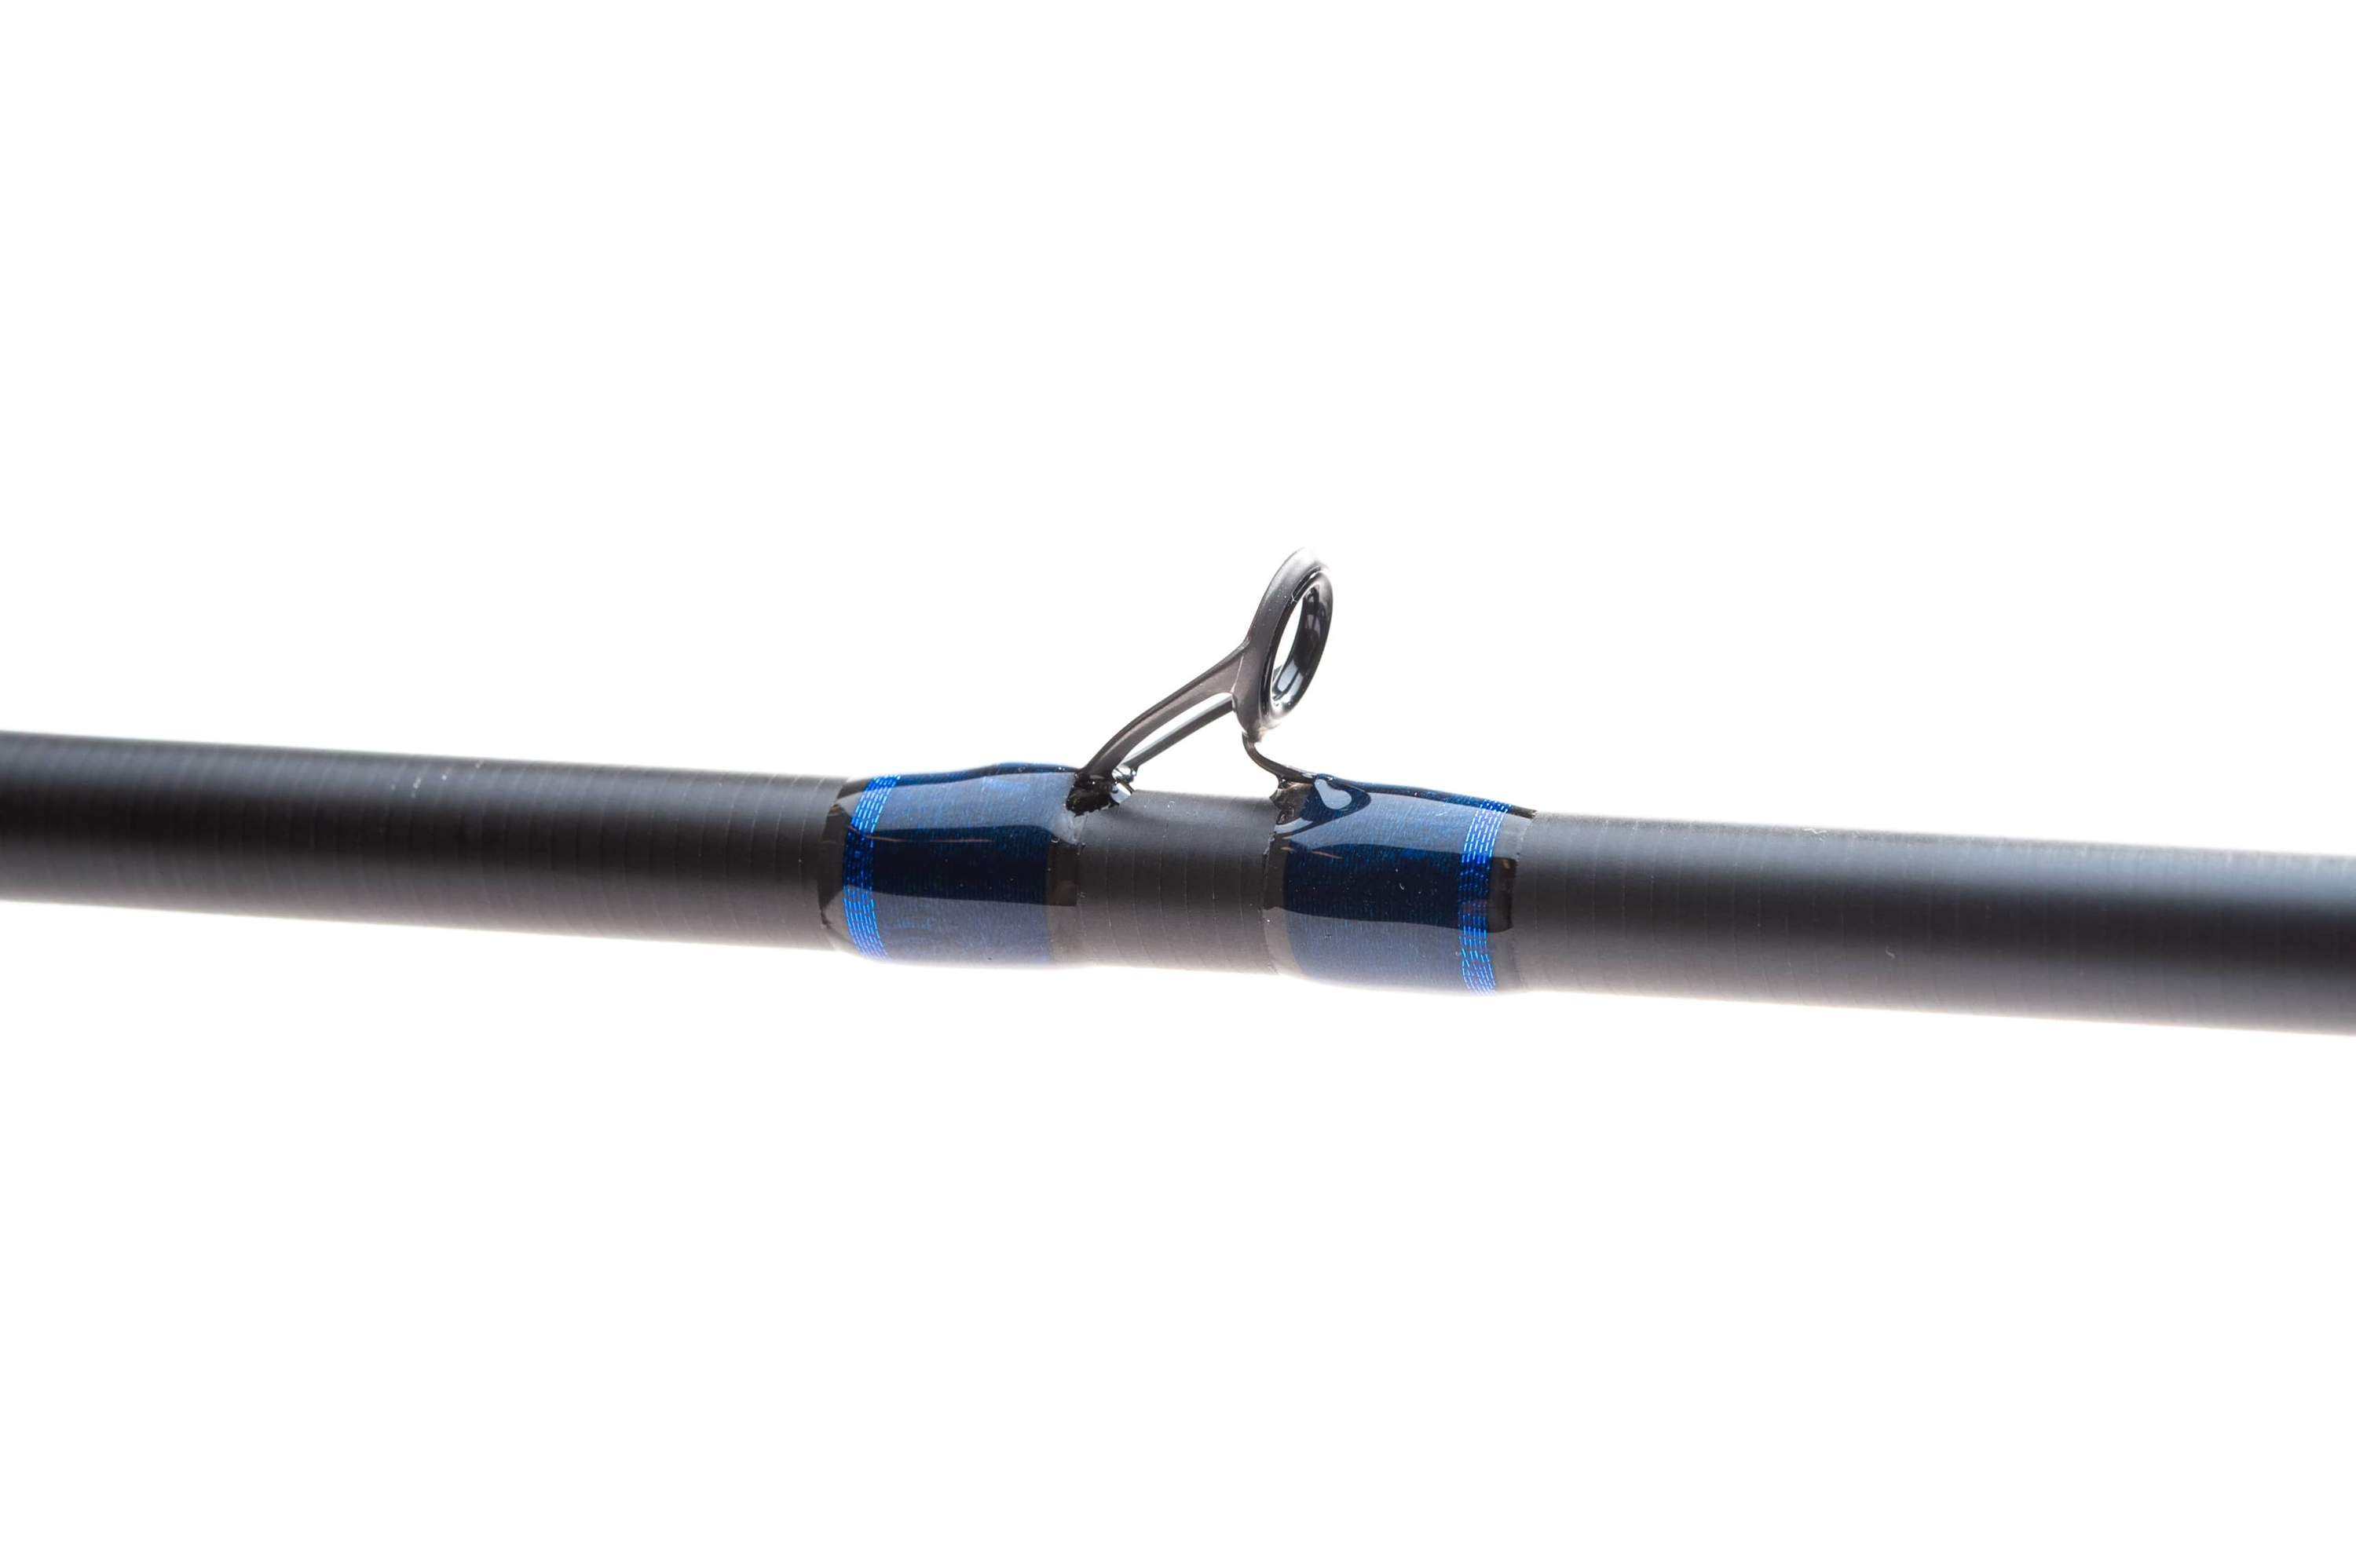 Helium Hollow Body Frog, Toads Casting Rods – KISTLER Fishing